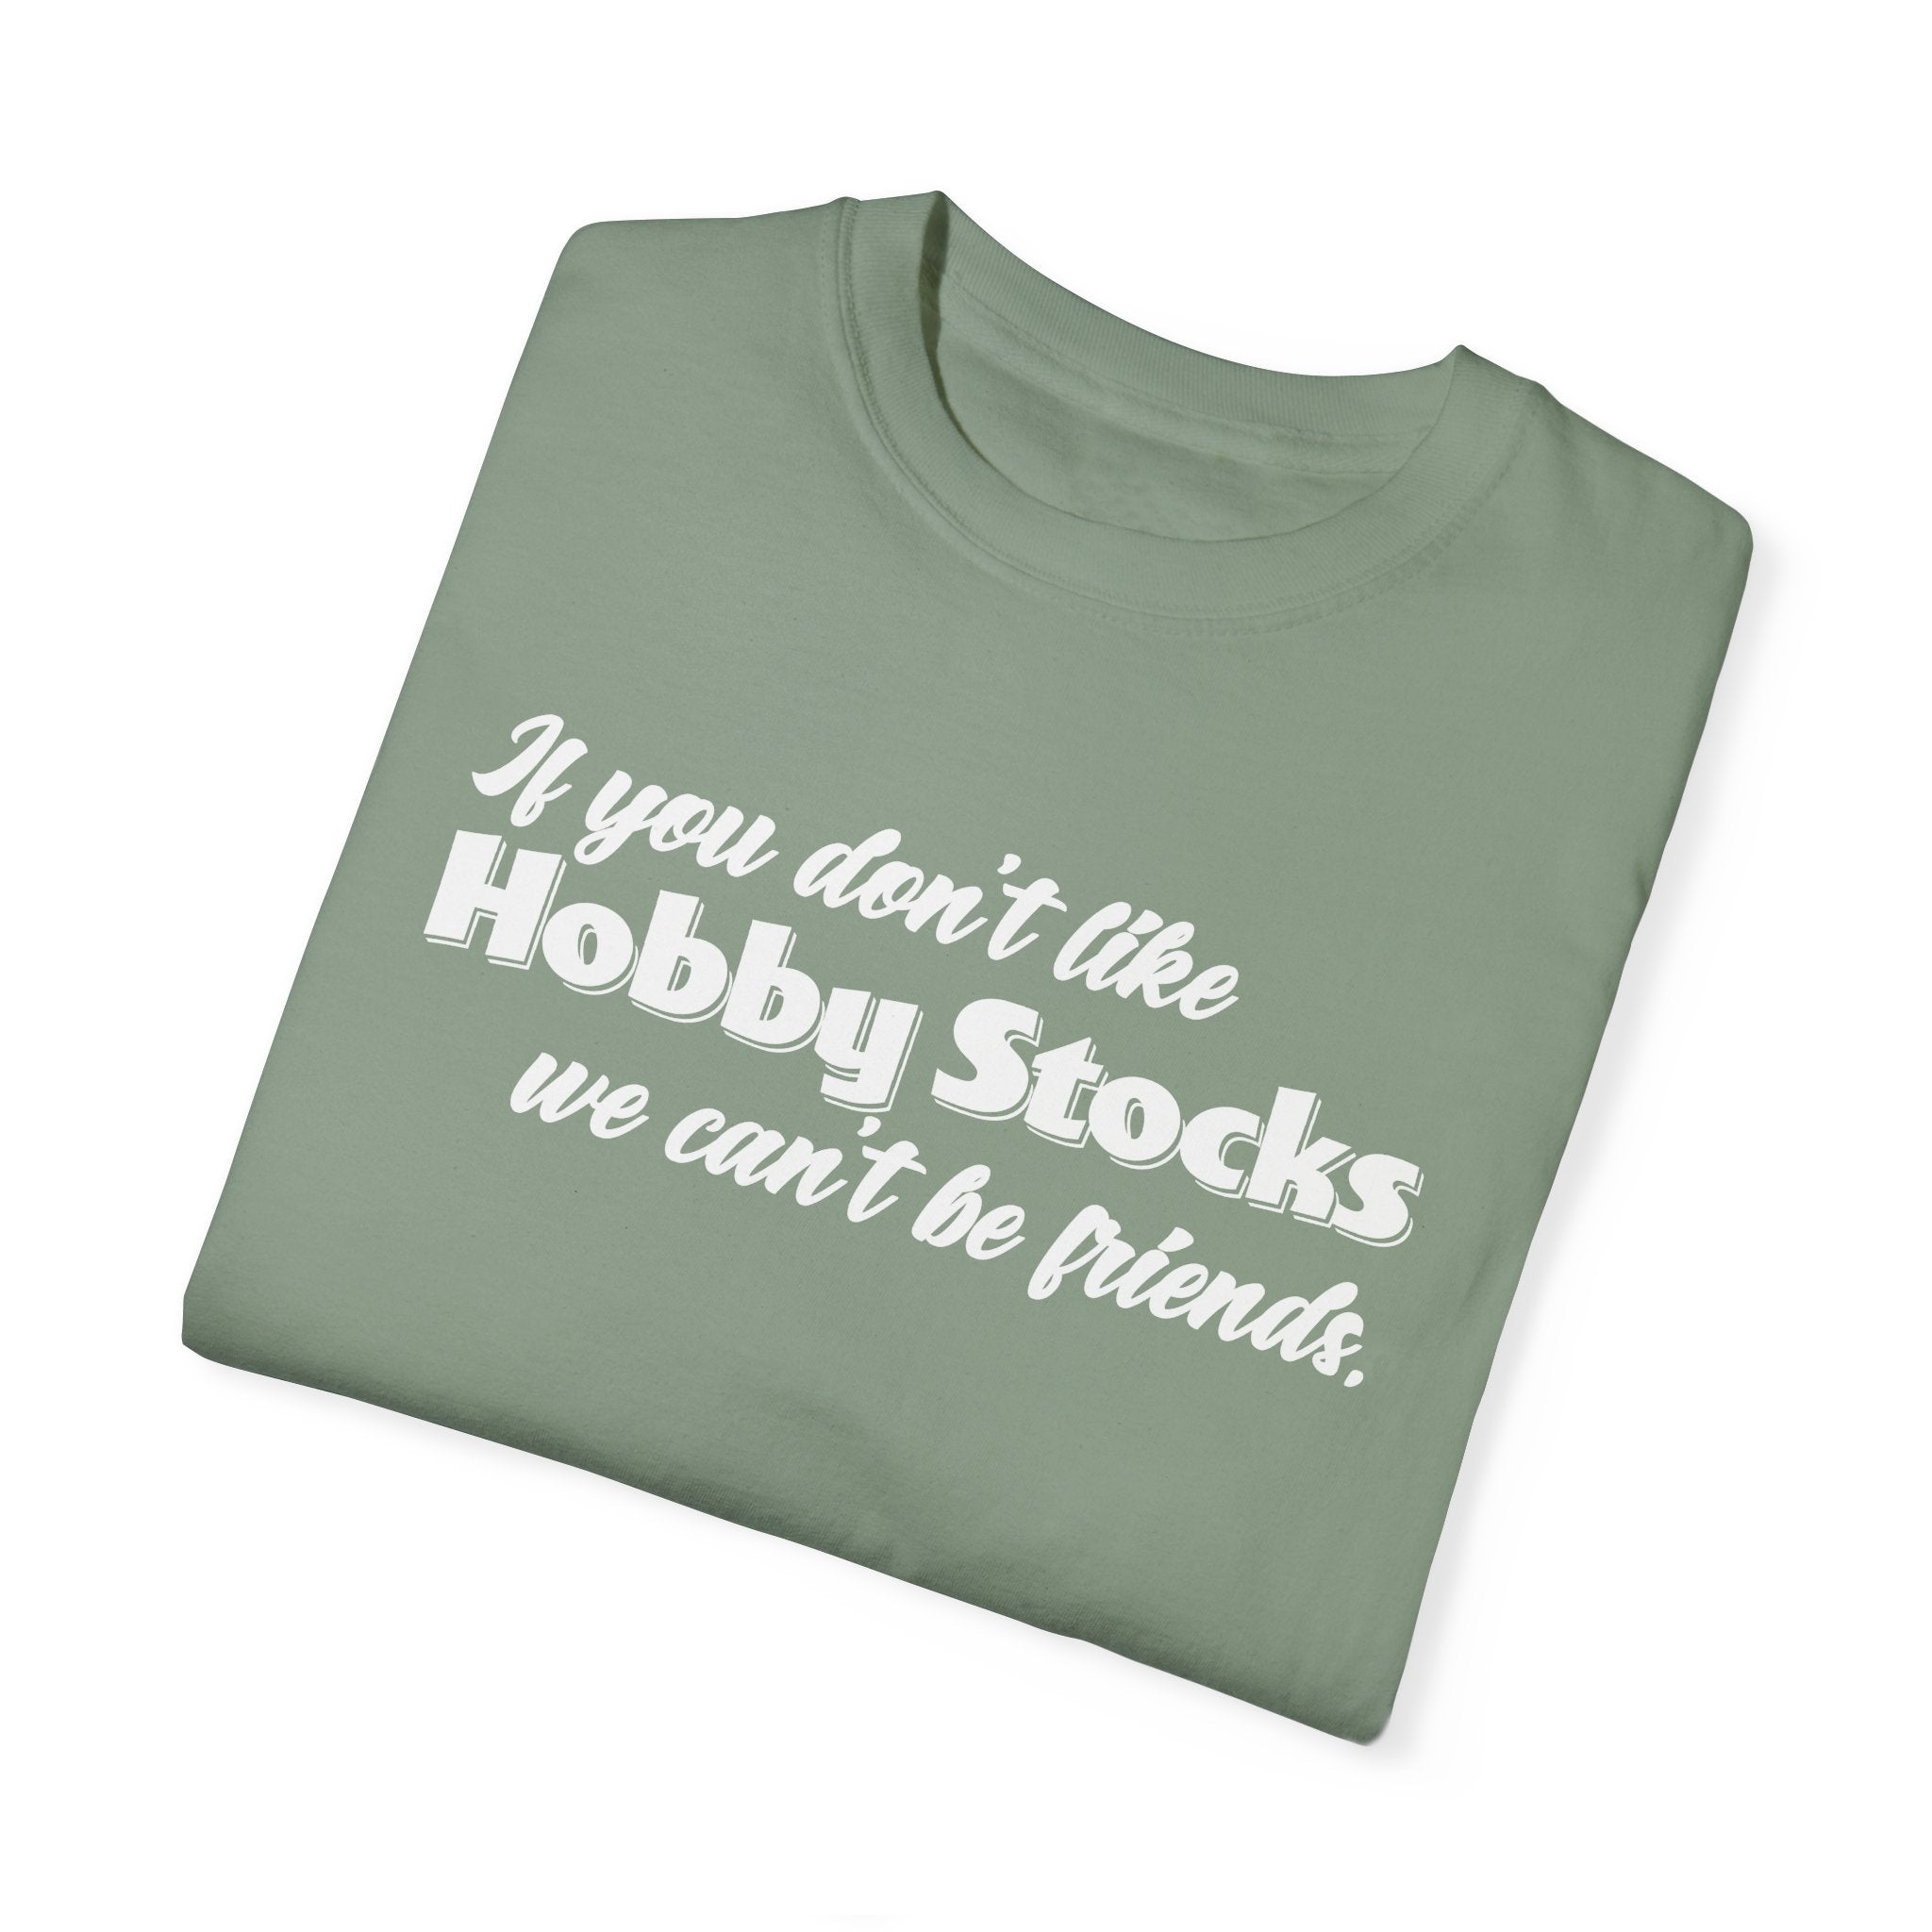 If You Don't Like Hobby Stocks We Can't Be Friends Unisex Heavyweight Ladies Racing Tee